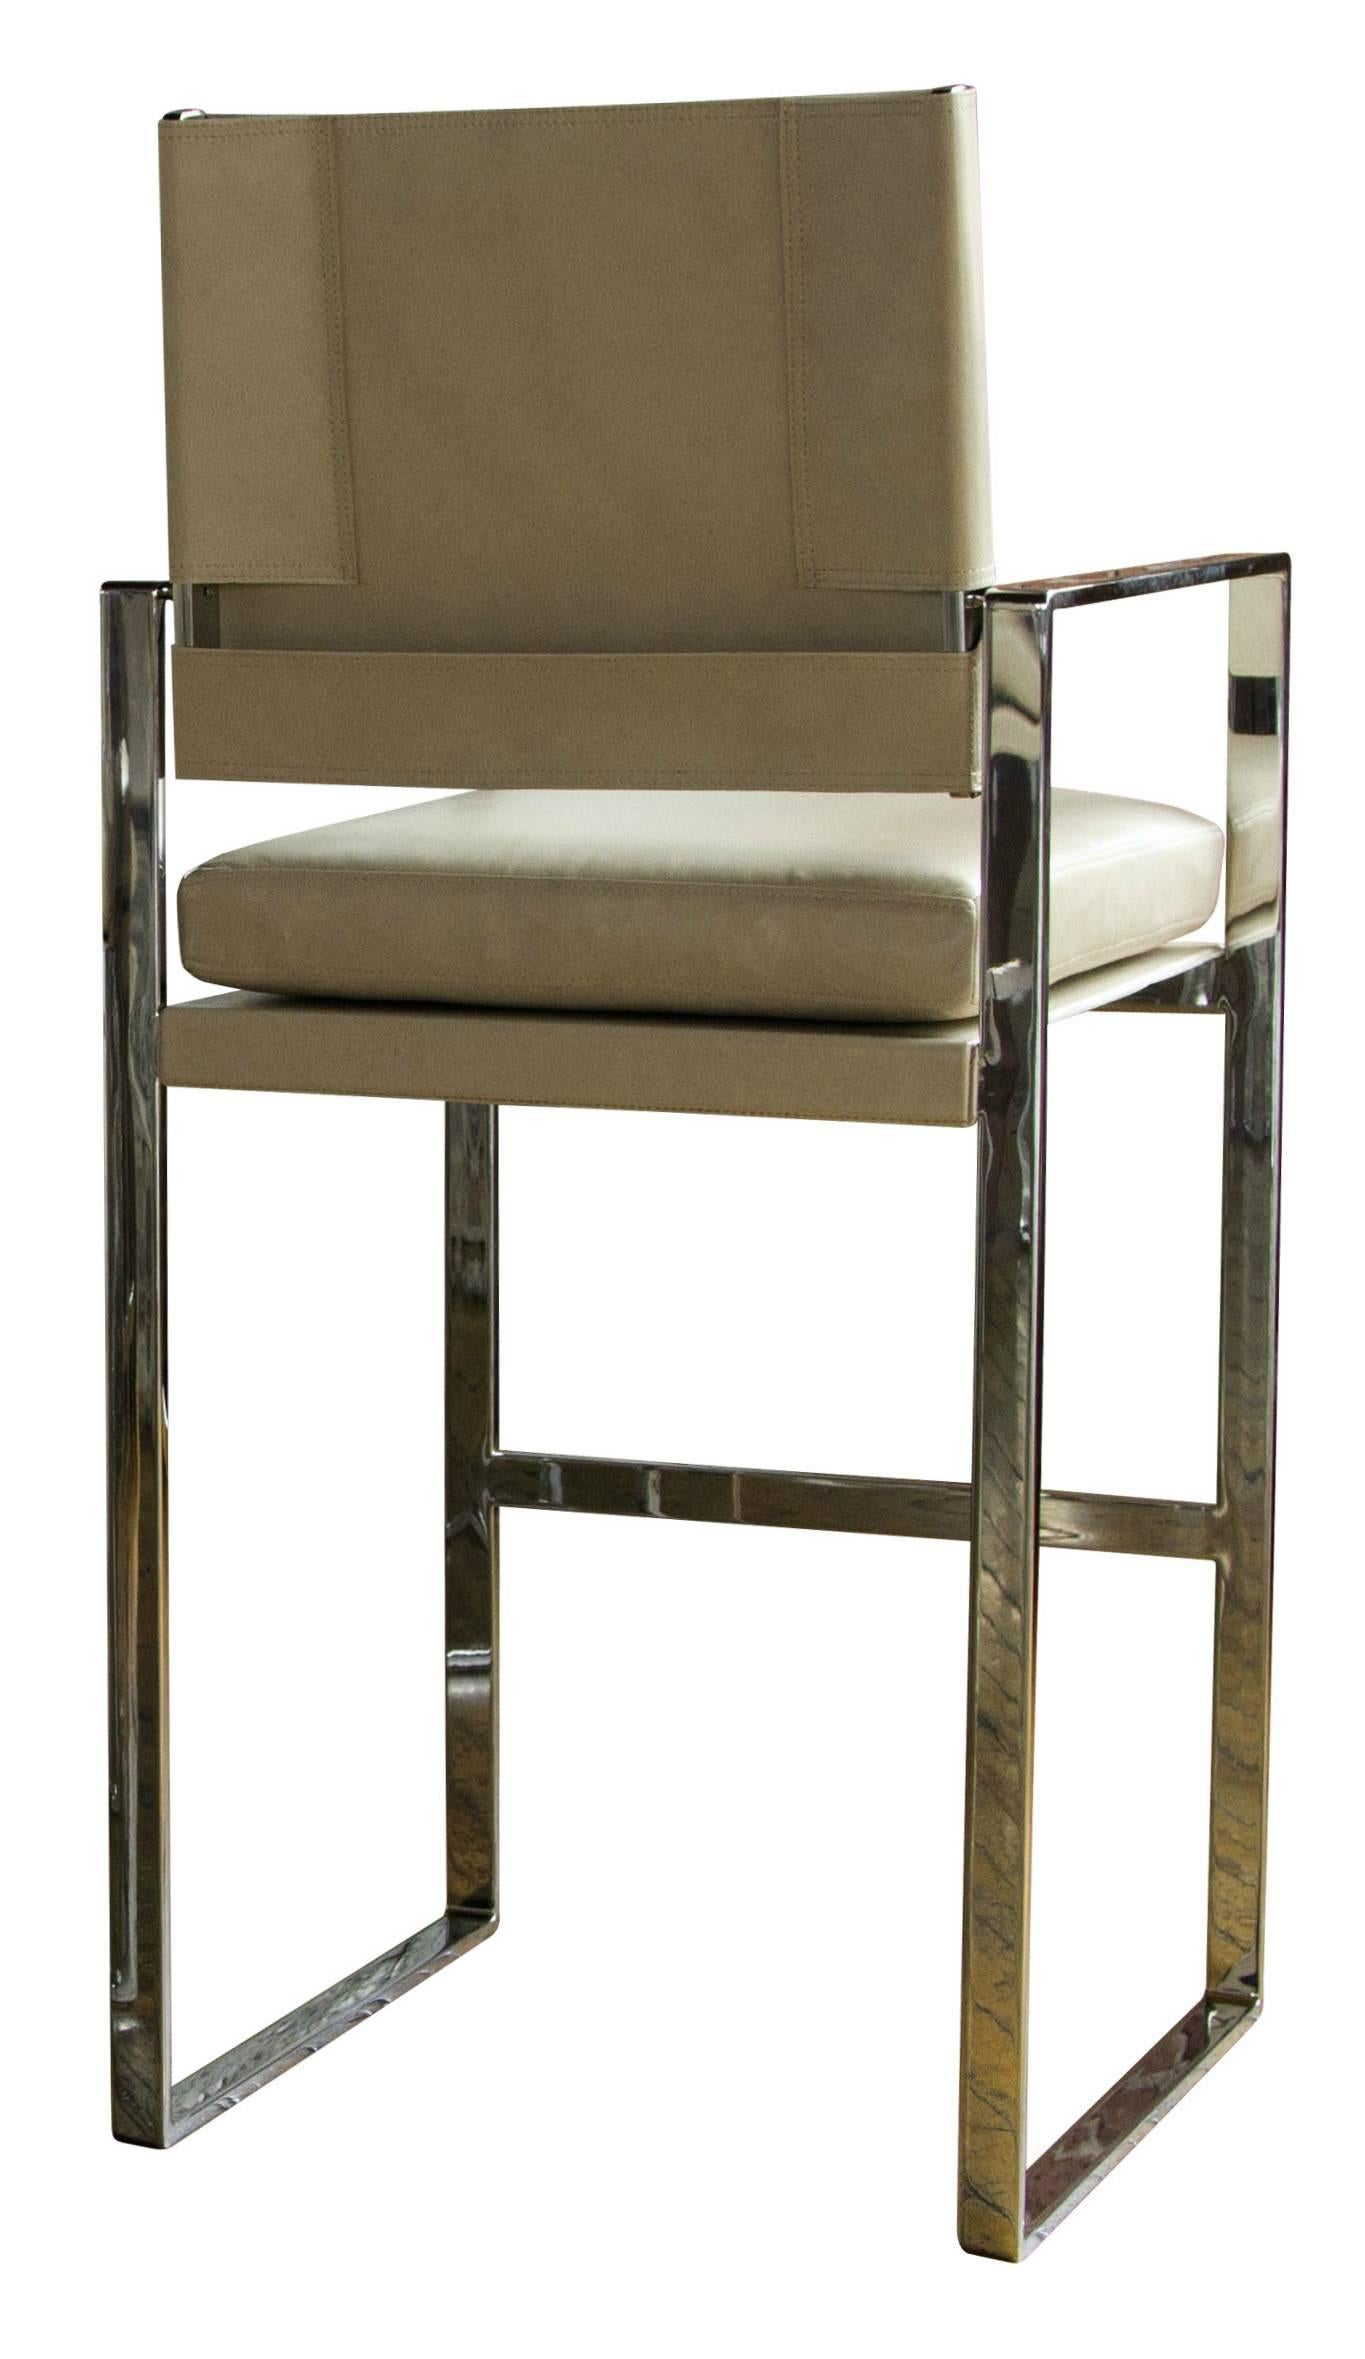 The St. Cloud bar chair in polished steel with Moore & Giles: Notting Hill / Parchment leather upholstery.

The modern campaign collection by Richard Wrightman combines the vernacular of traditional form with a modern aesthetic, mixing memory with